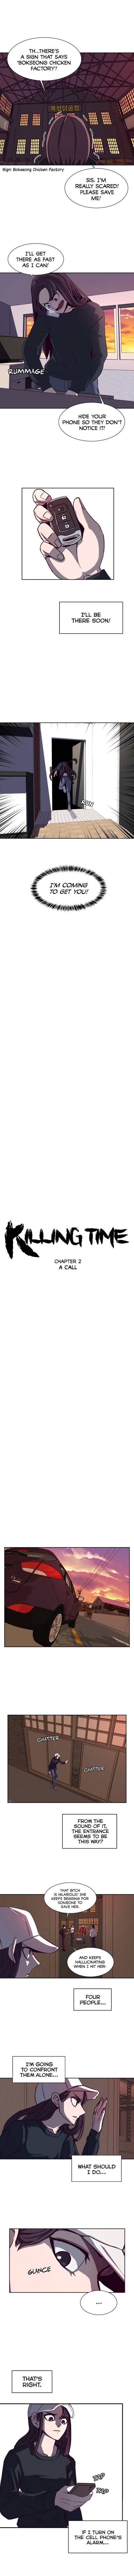 Killing Time Chapter 2 #4